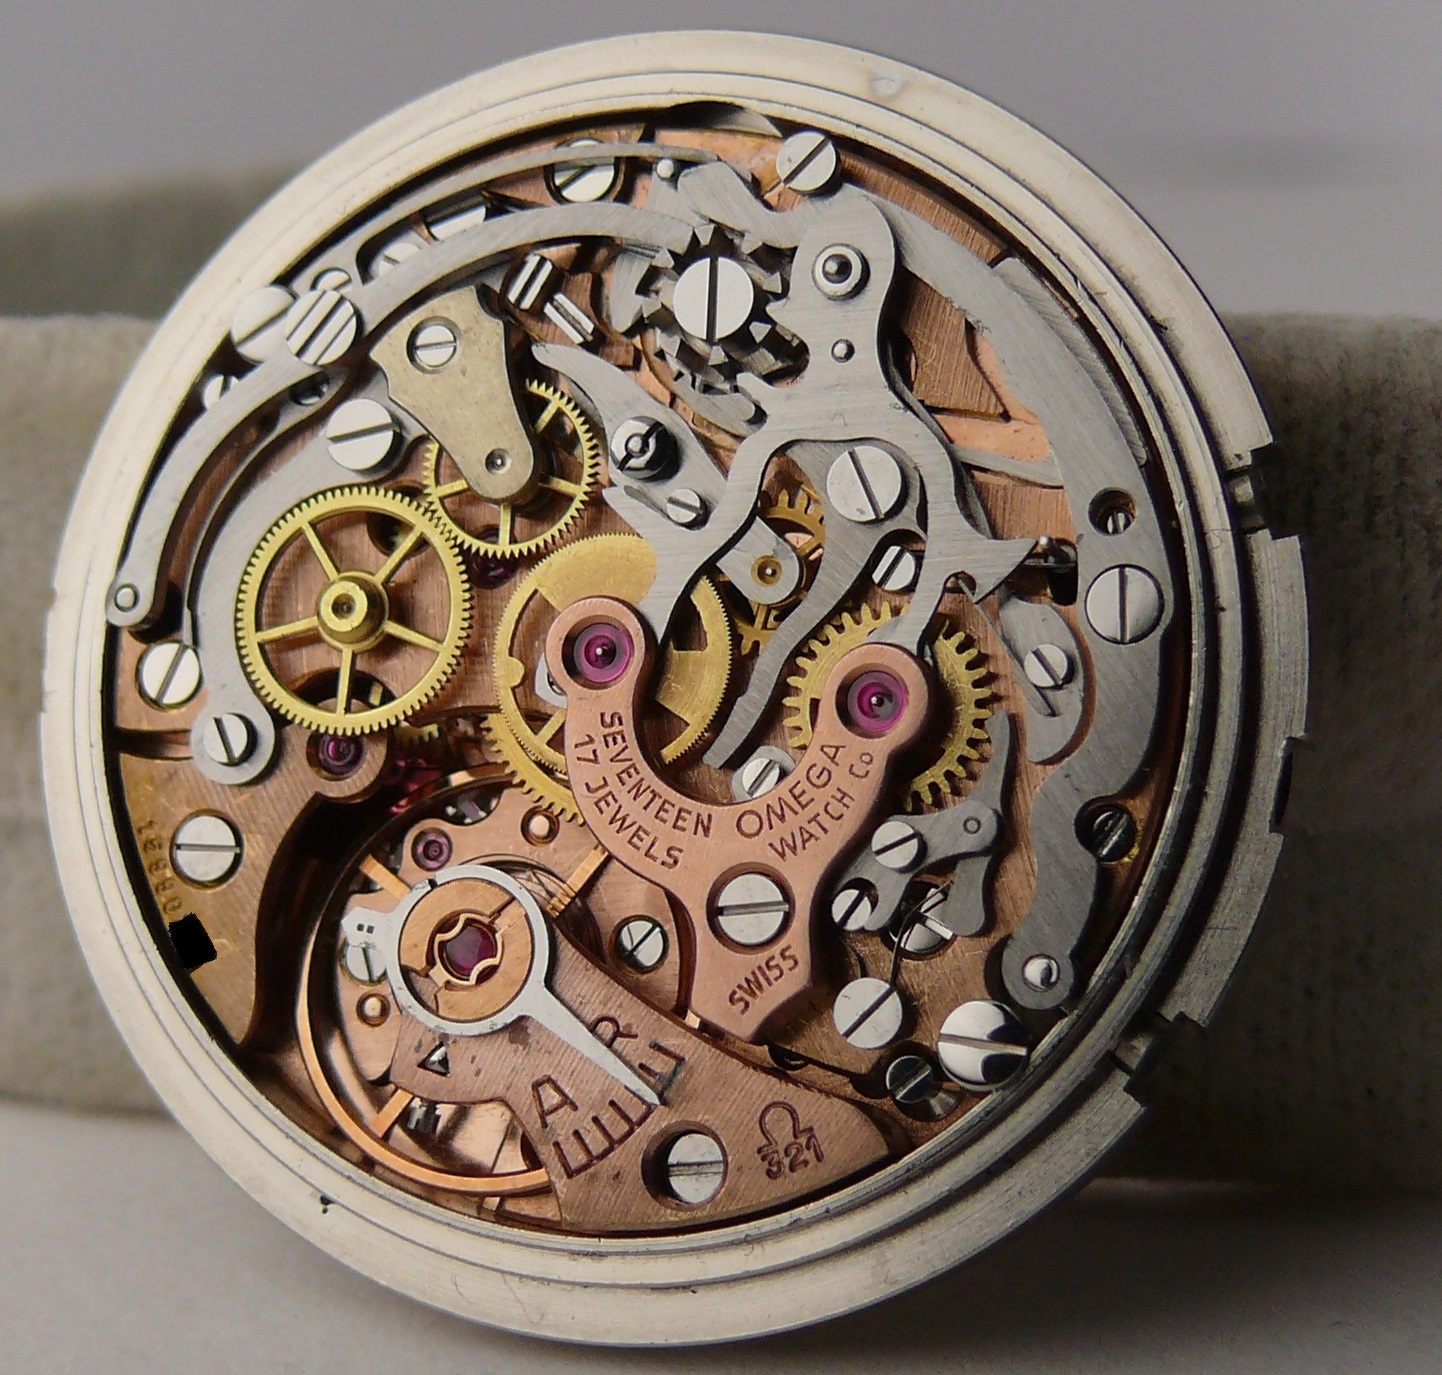 1957 Vintage Omega Speedmaster 2915-1 movement calibre no 321. Movement serial is 15,996,xxx. This - Image 4 of 5